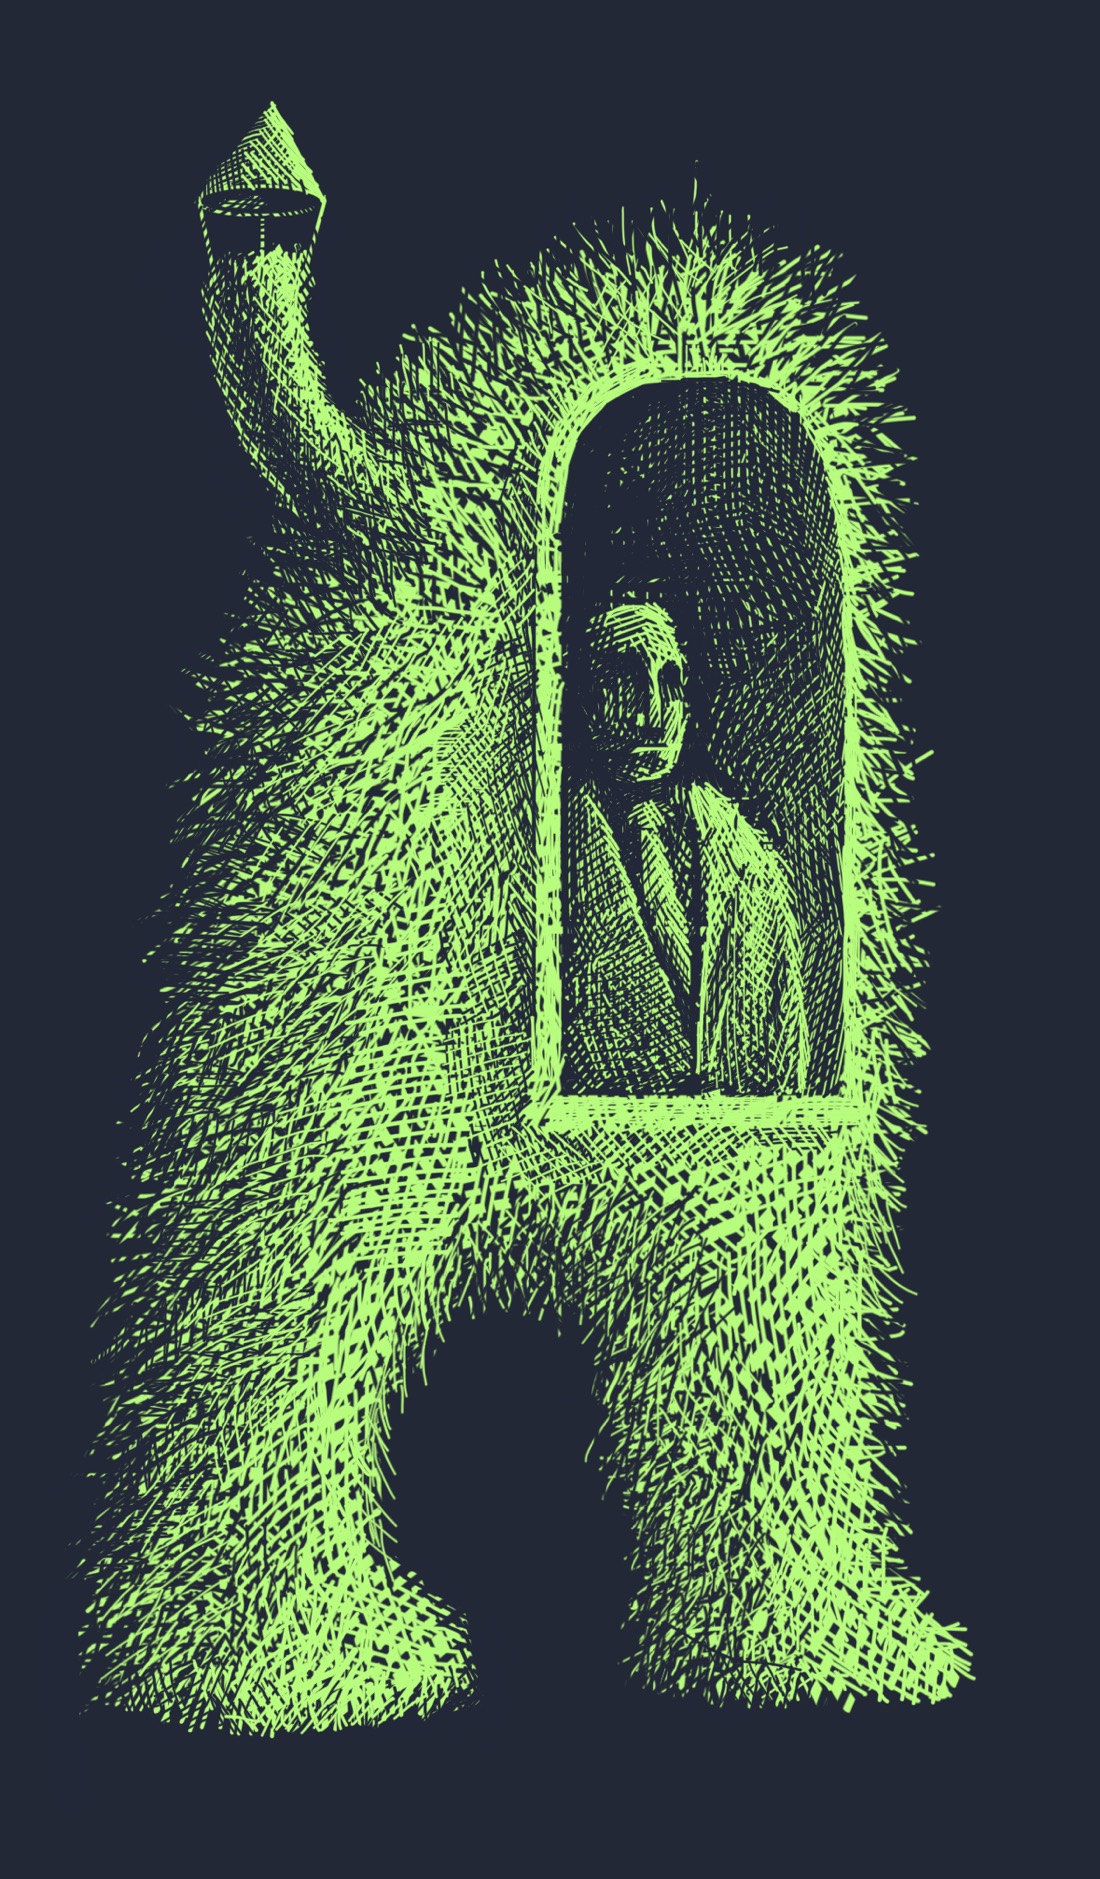 A large, furry, two-legged creature. The creature has no arms. Where the creature's face would be is an open window with a person staring out of it. The person is wearing a suit with a tie. Protruding from the rear of the creature's head, sort of like a horn, is a chimney: one of those pipe chimneys with a little roof over it.